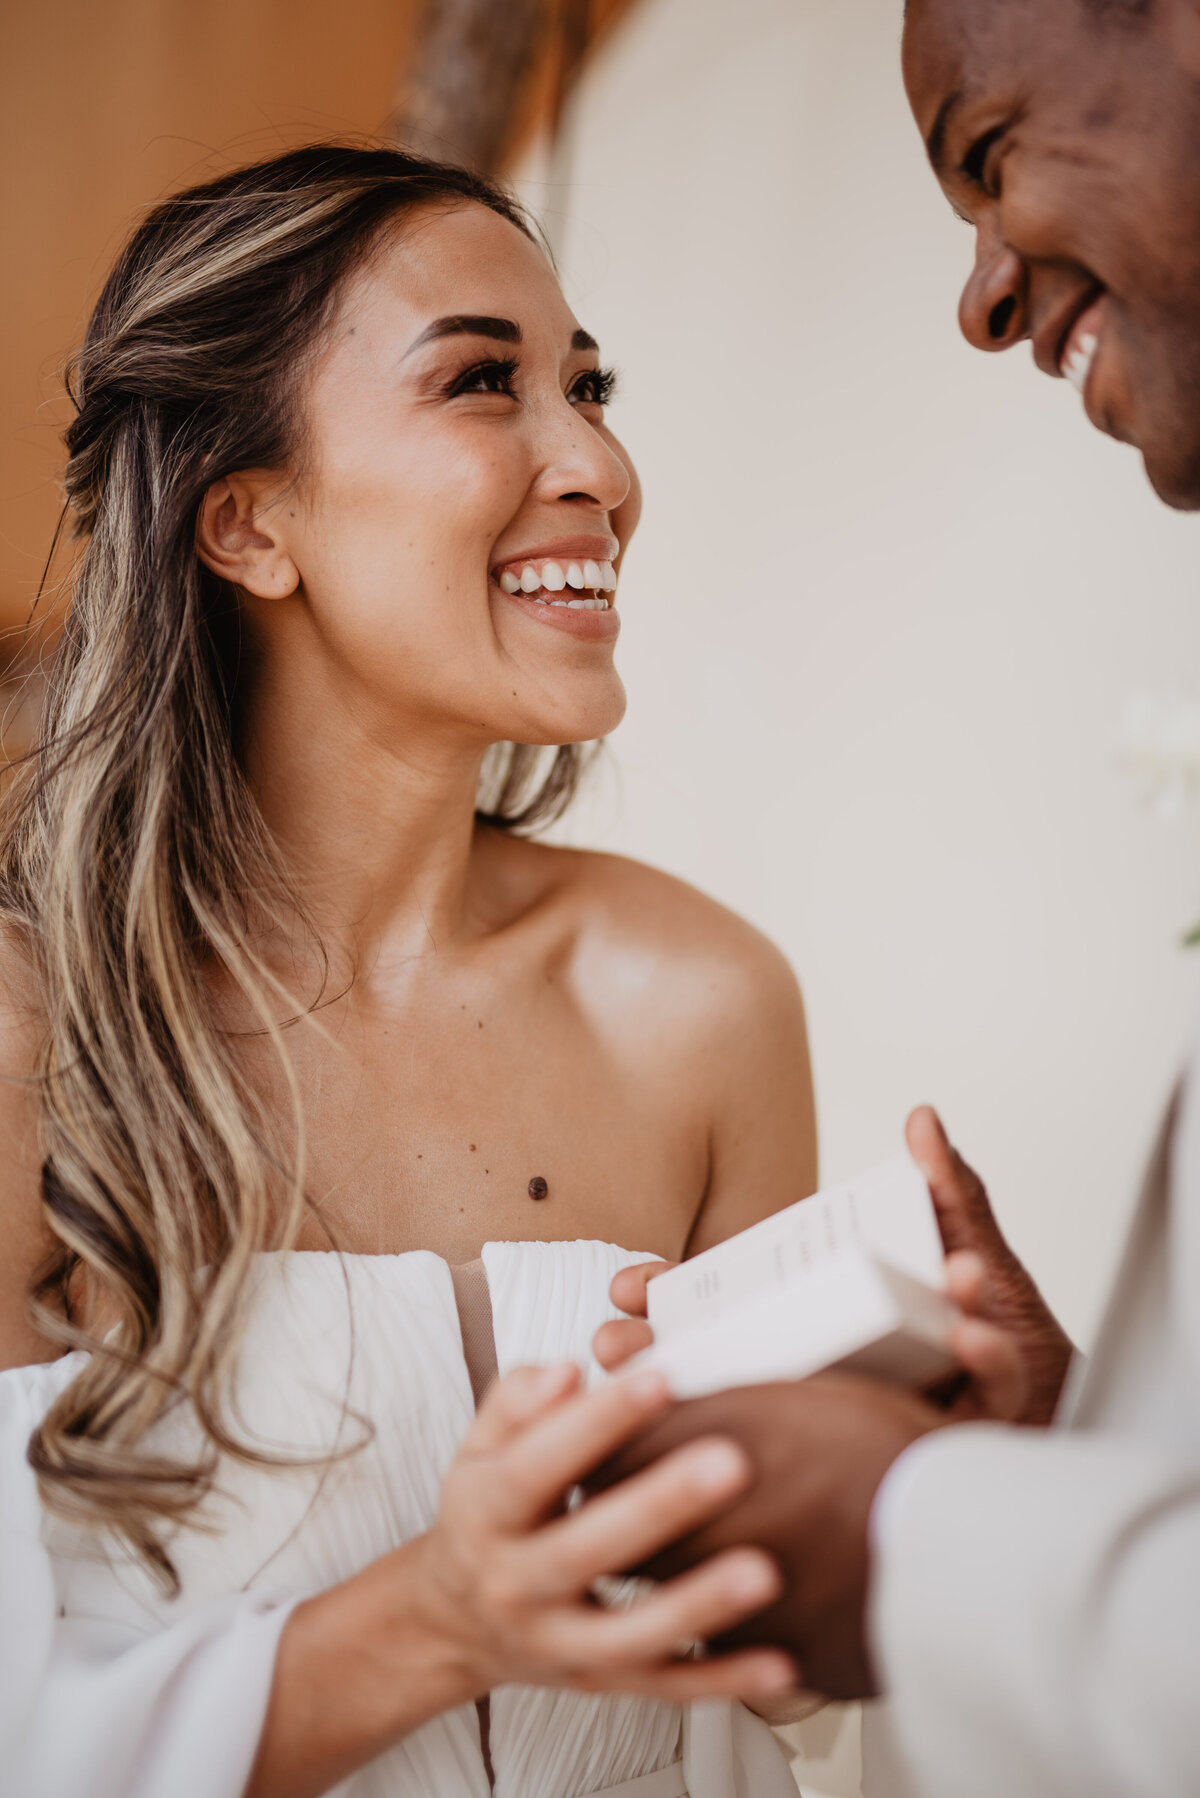 Utah Elopement Photographer captures woman smiling at man after opening gift